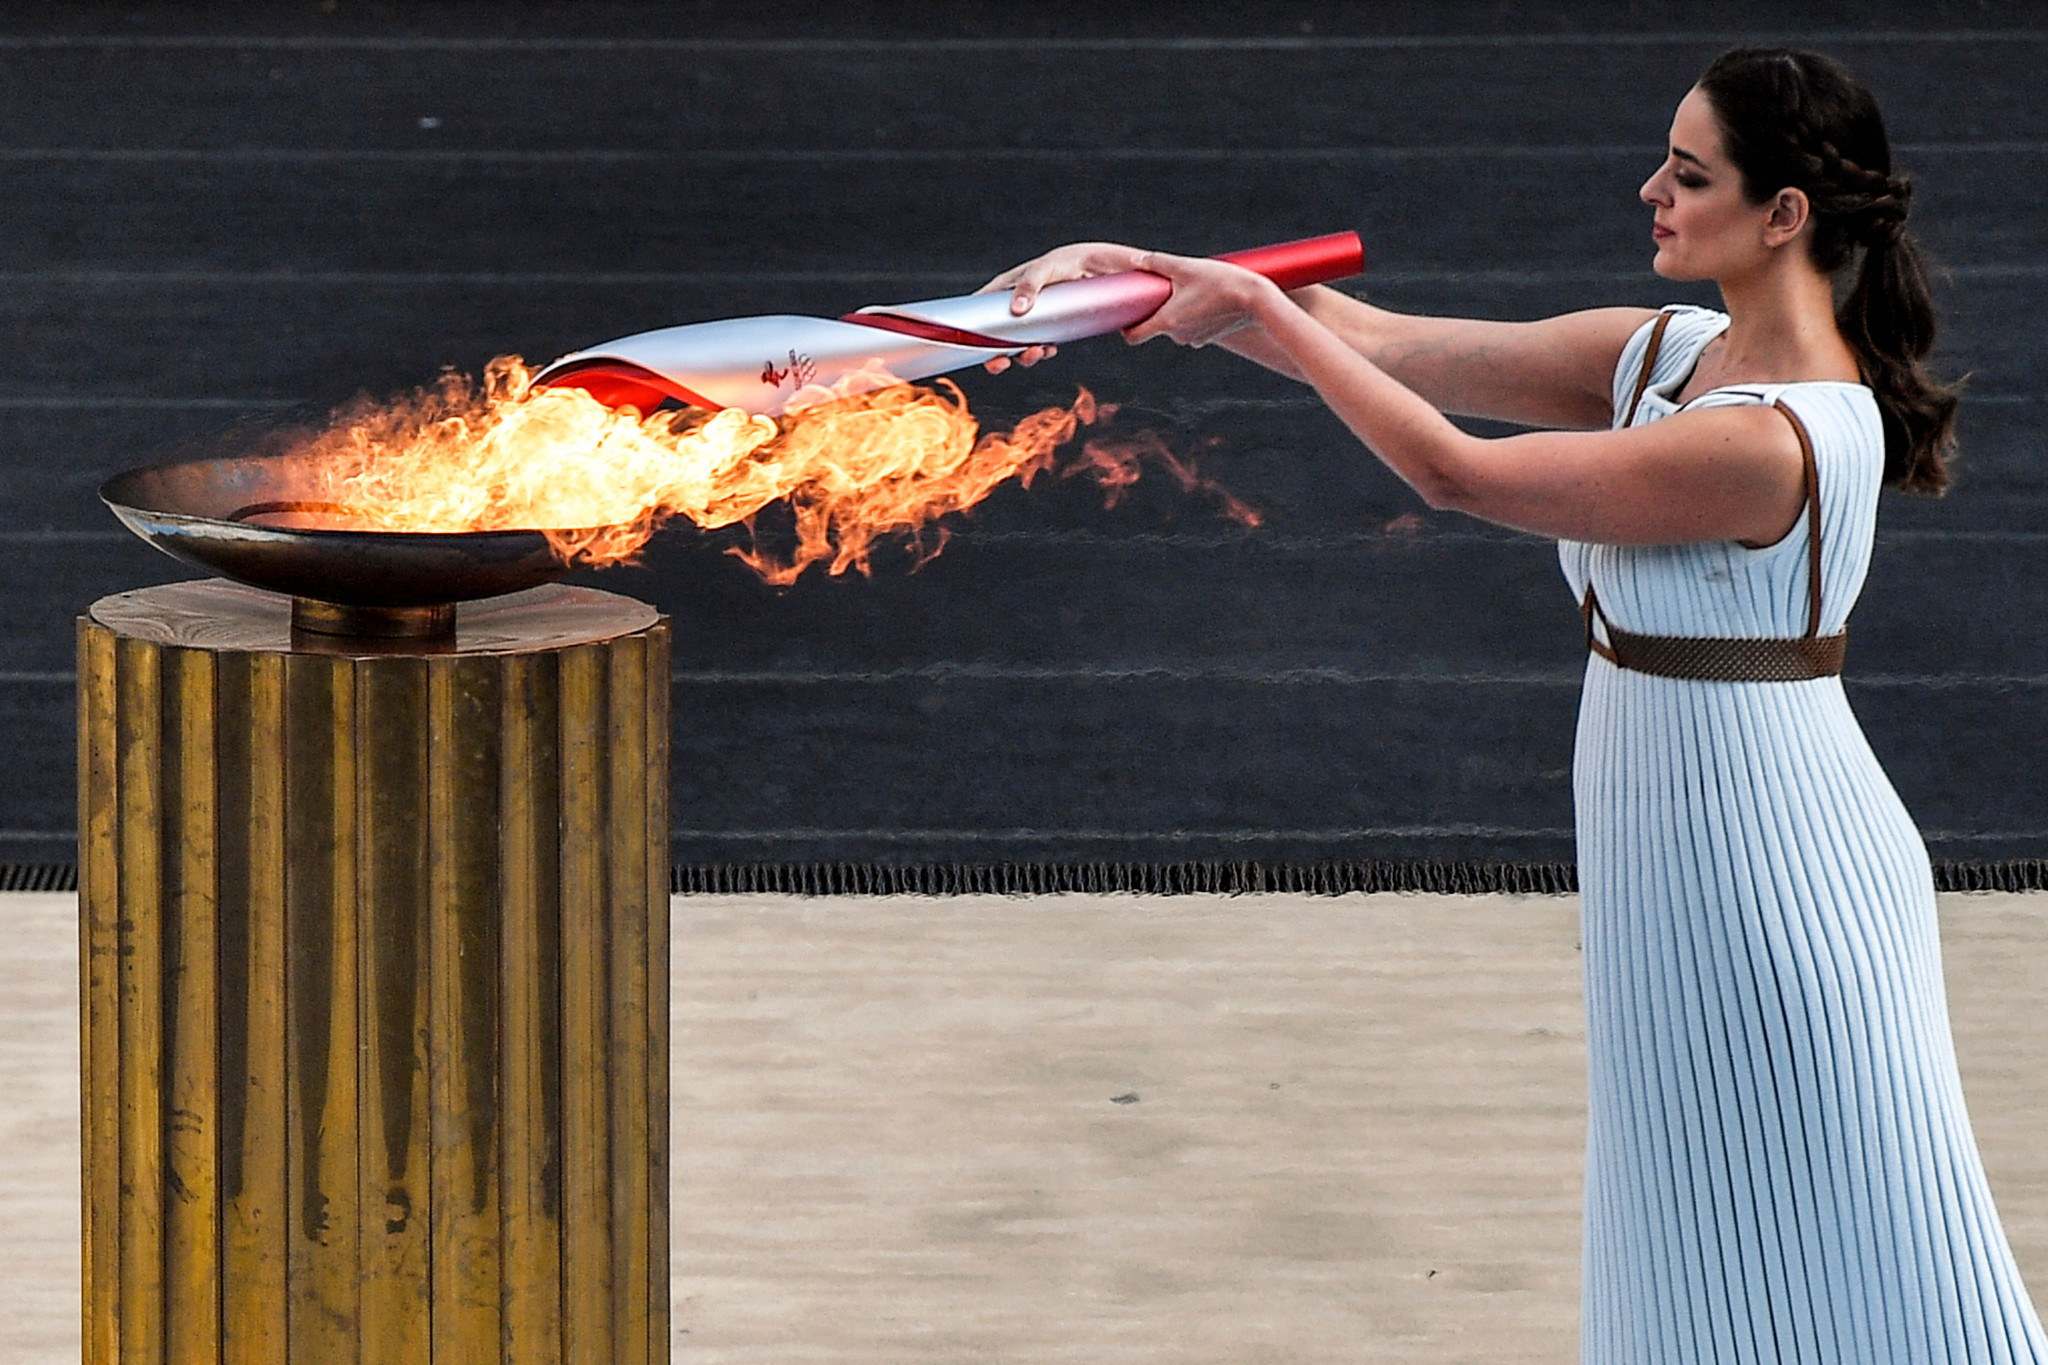 Actress Xanthi Georgiou, in the role of High Priestess, lights the Olympic Torch ©Getty Images 